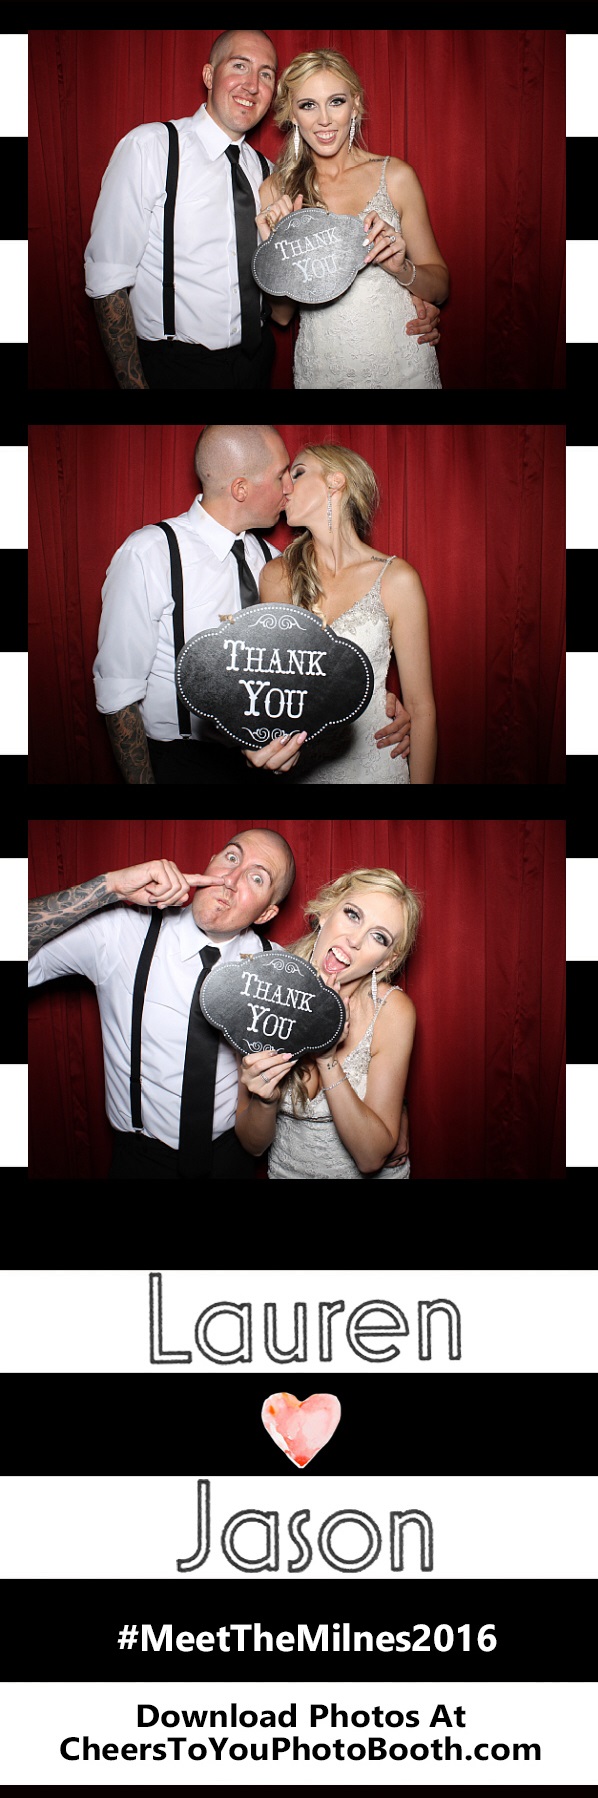 Cheers To You Photo Booth Rentals | Huntington Beach, CA | Template Design Examples